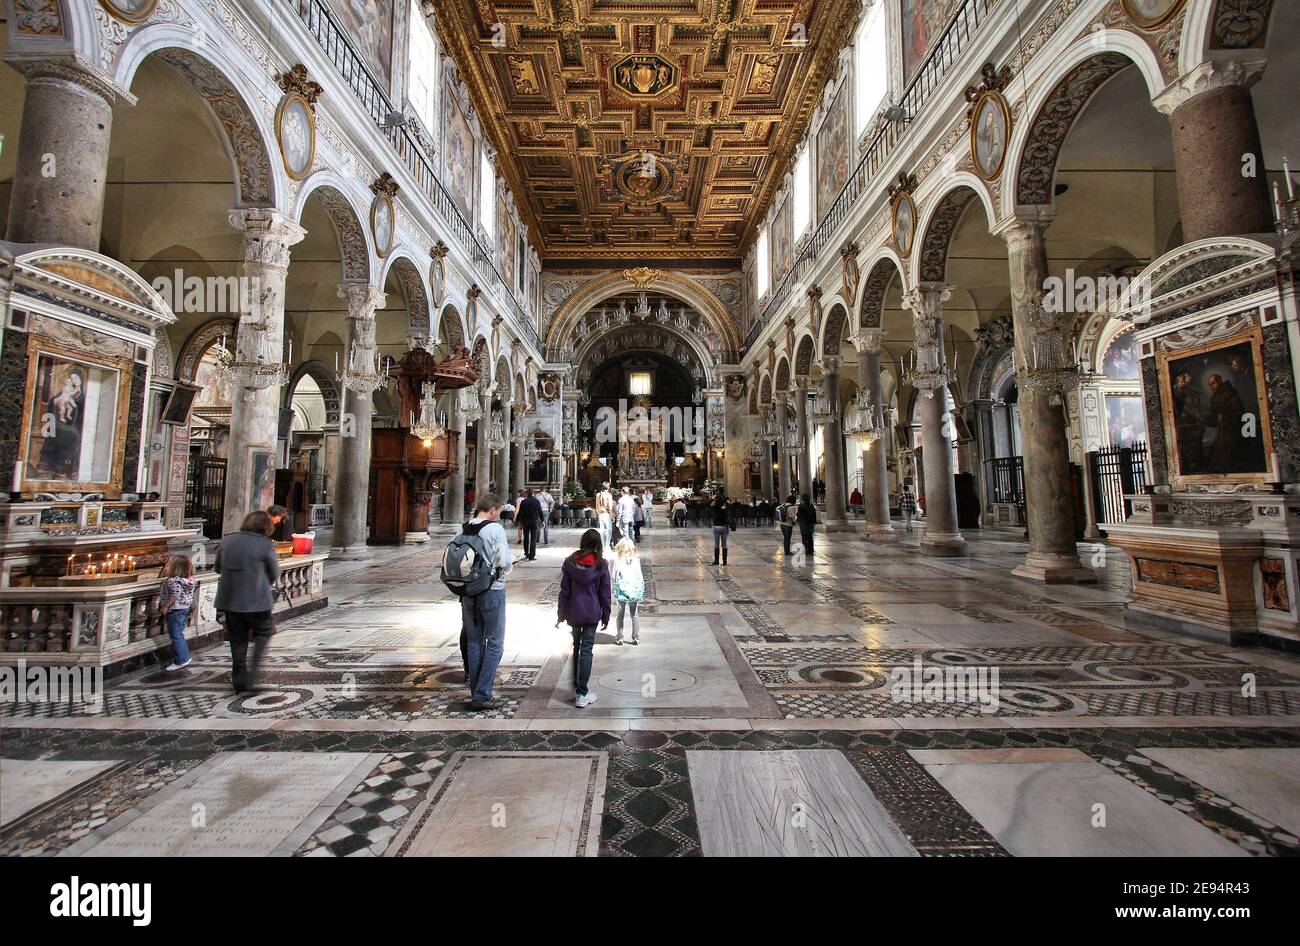 ROME, ITALY - APRIL 8, 2012: Tourists visit Basilica Santa Maria in Aracoeli in Rome. The famous romanesque church dates back to 12th century. Stock Photo